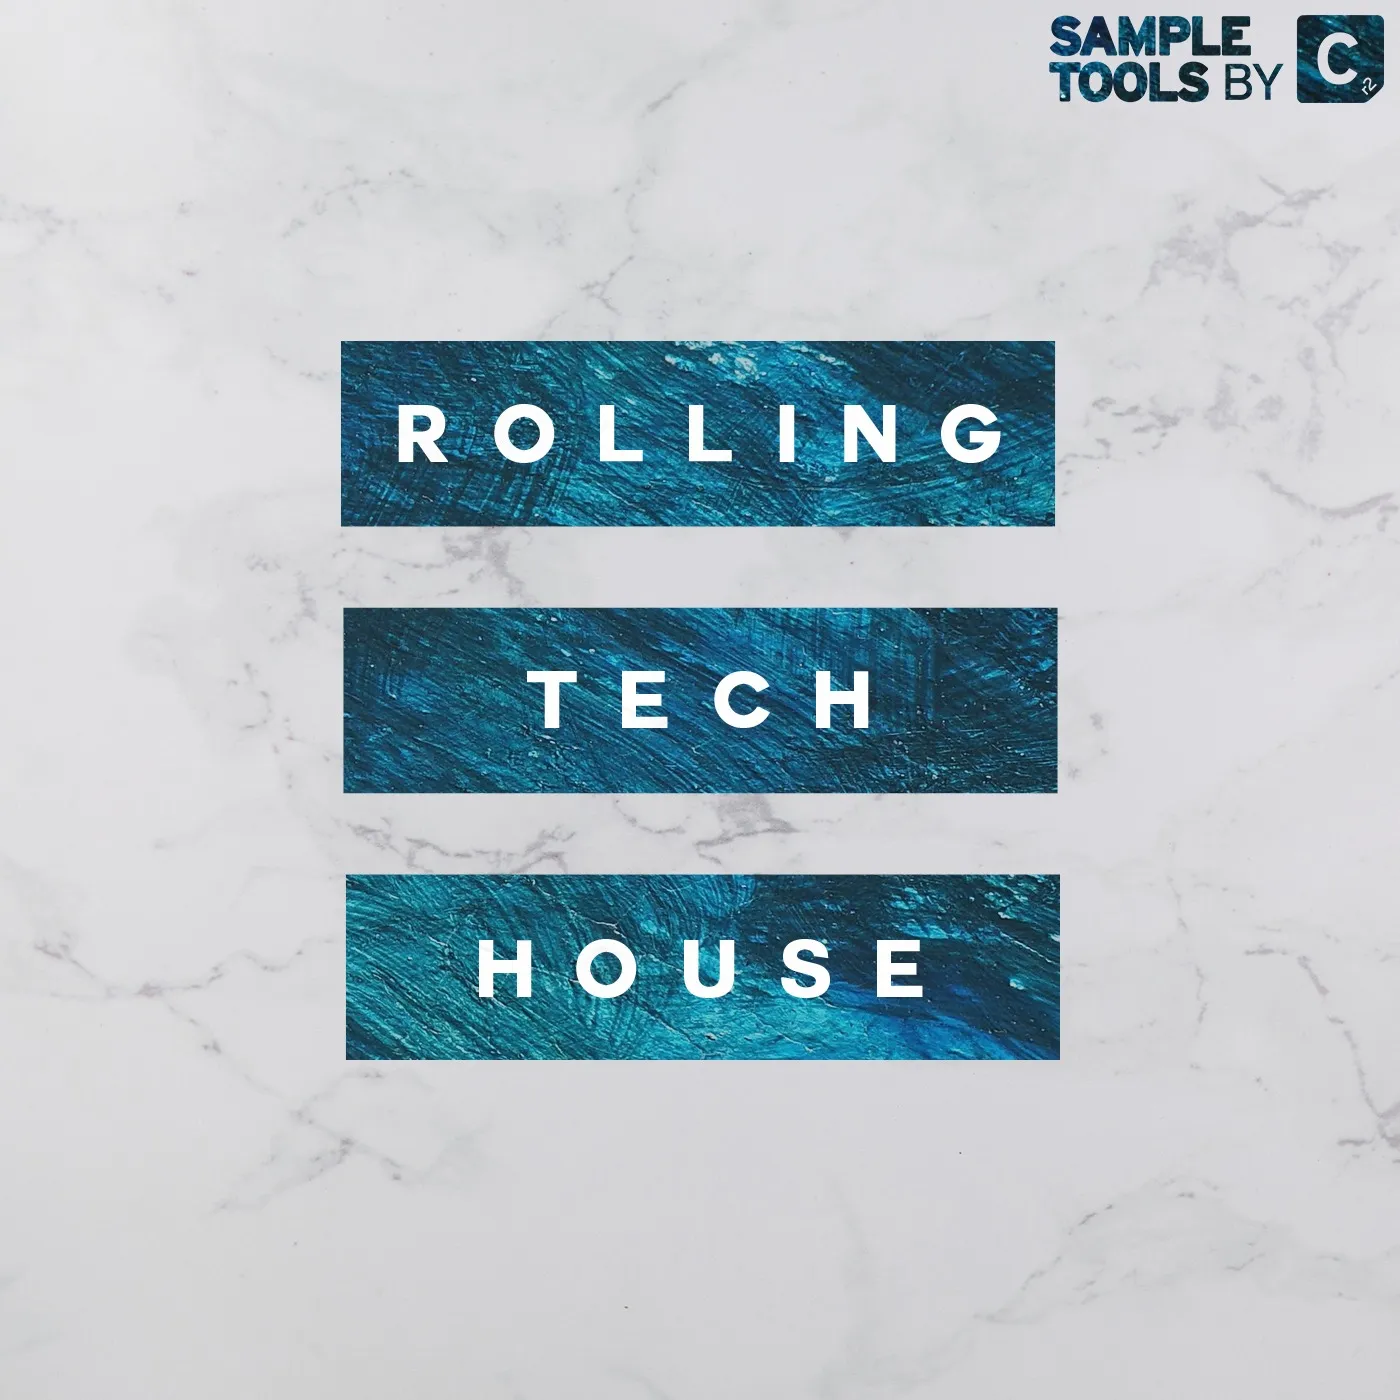 Sample tool. Sample Tools by cr2 - acid House and Rave. Rolling Technologies.